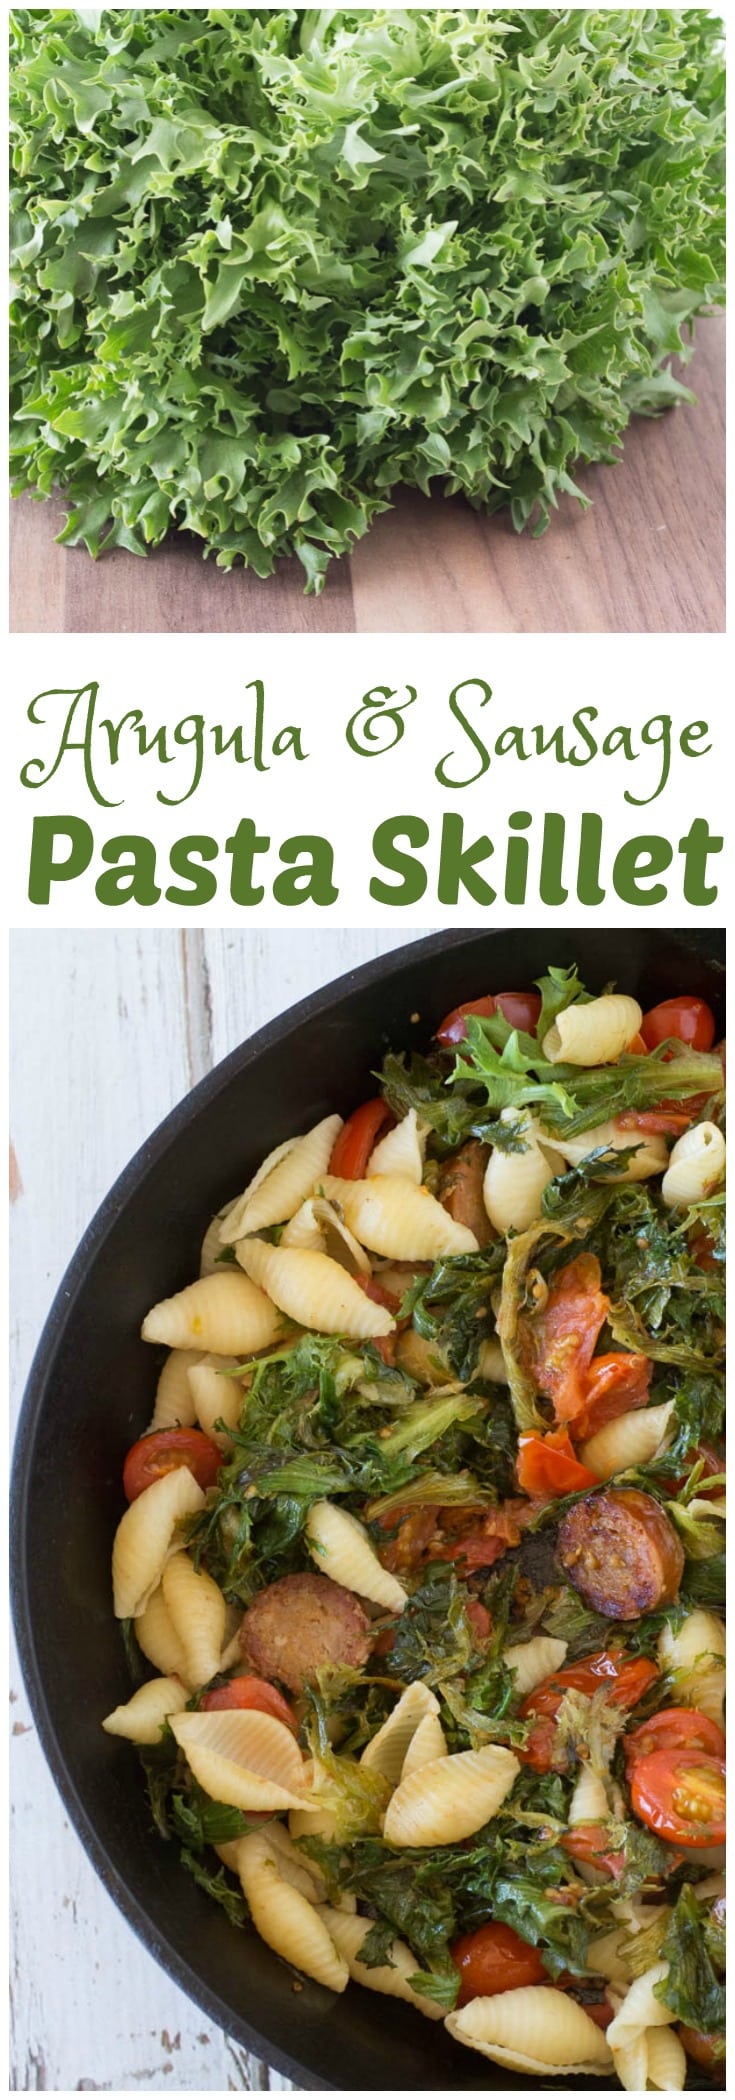 An image of a pasta skillet with arugula.